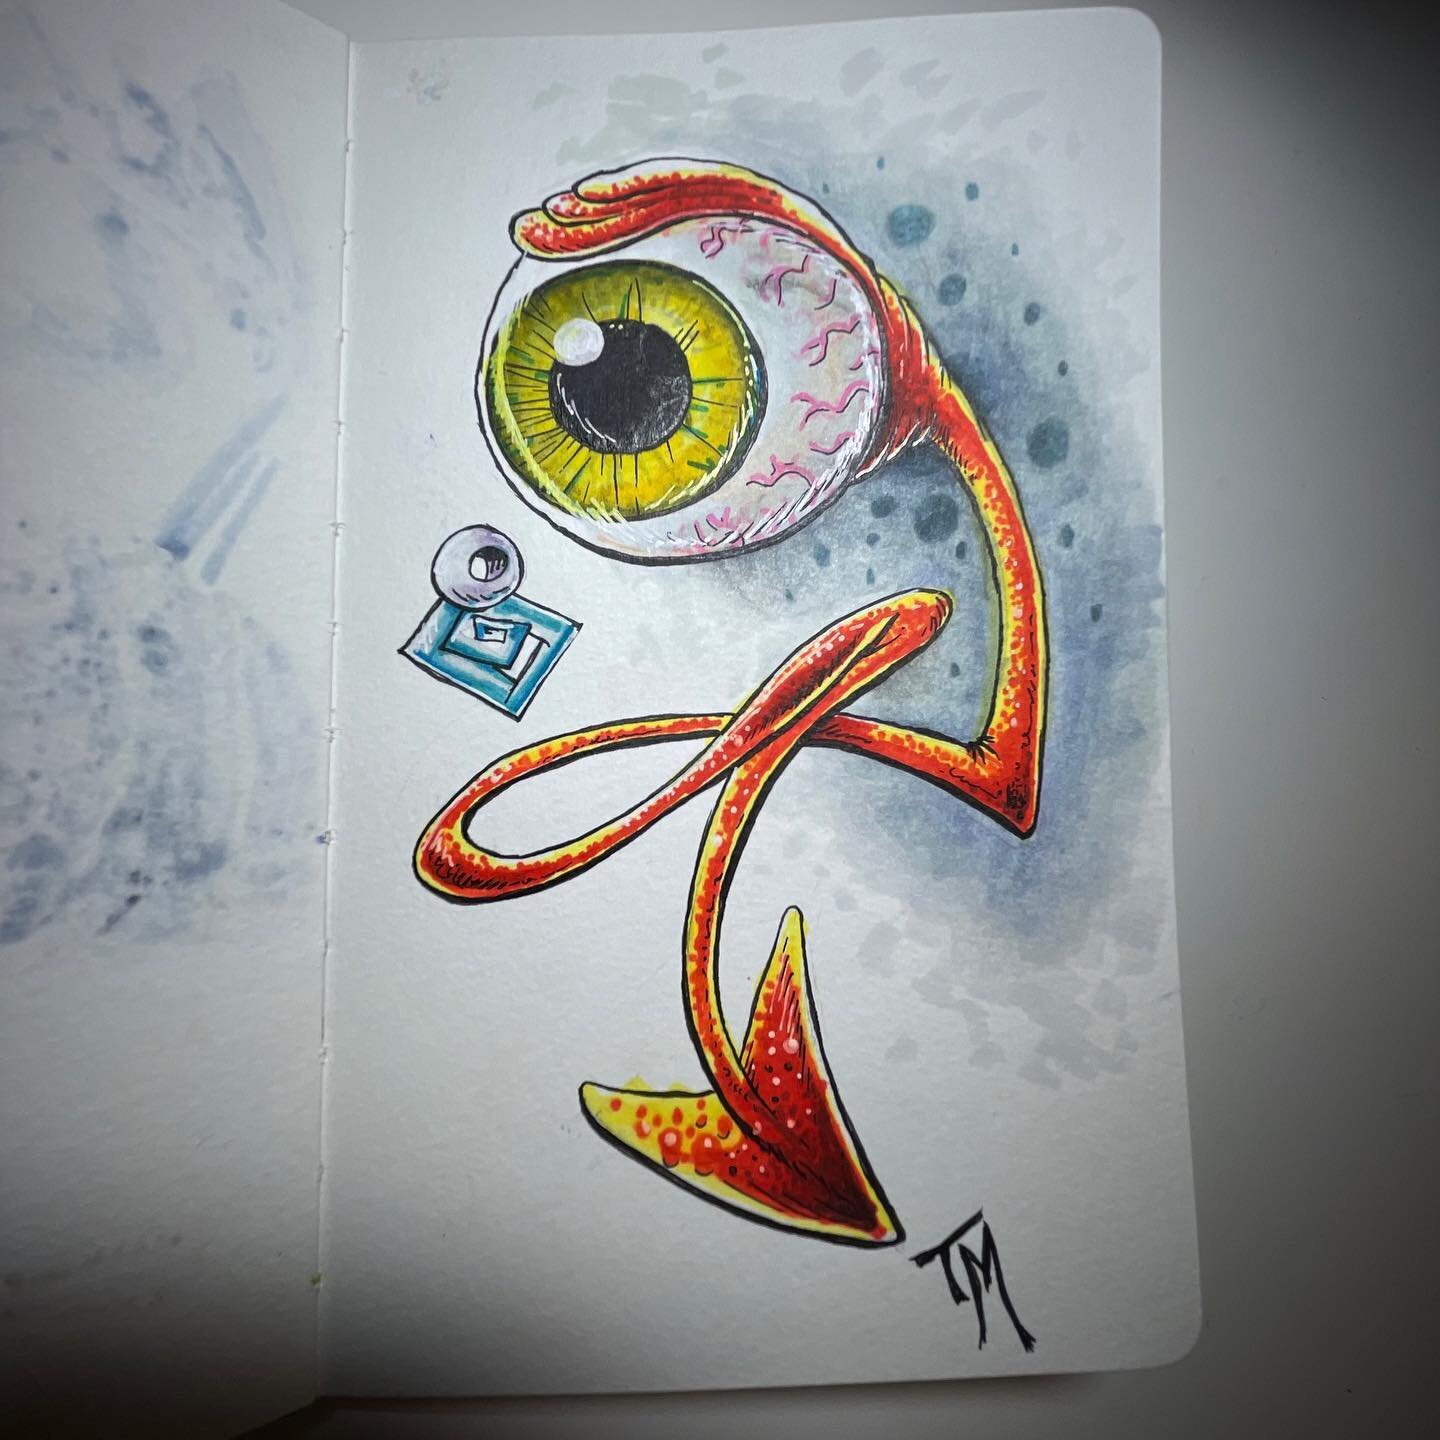 Eye tailing it out of there! 

#monster #demon #fink #sketch #lowbrow #drawing #ink #marker #eyeball #toon #newschool